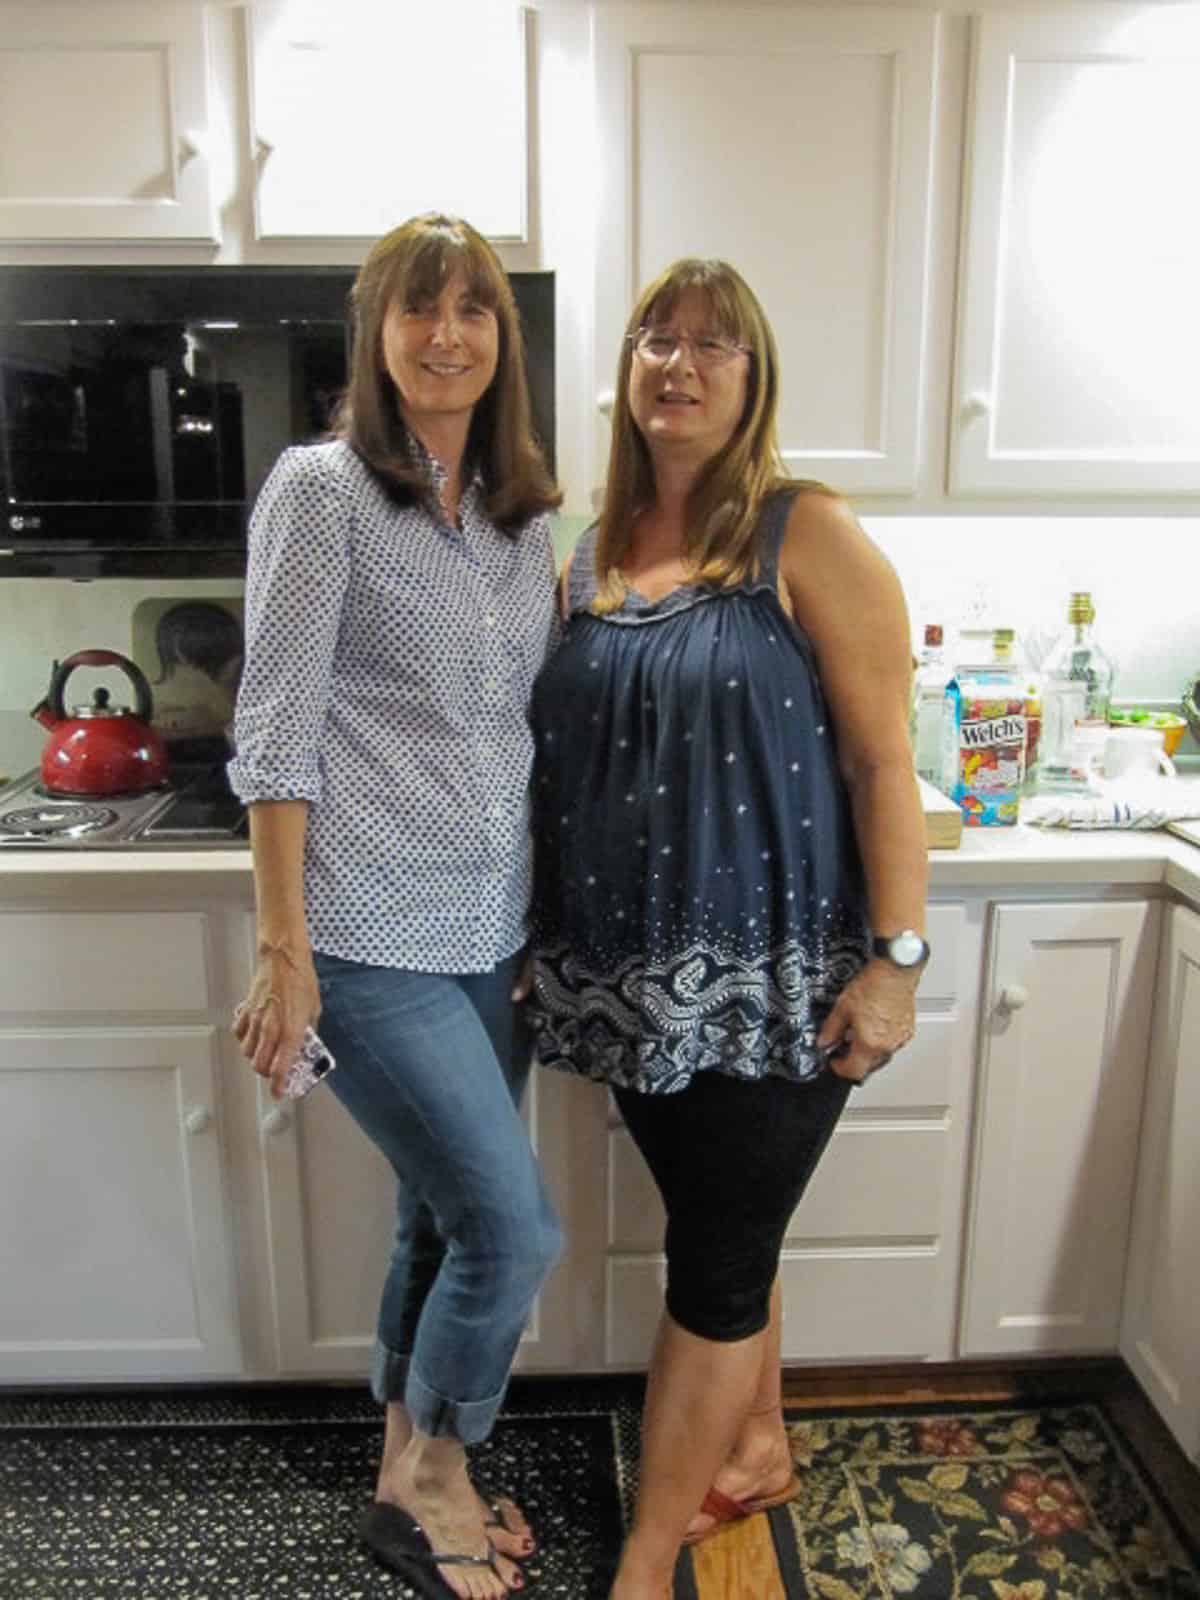 Two women posing for the camera in a kitchen.